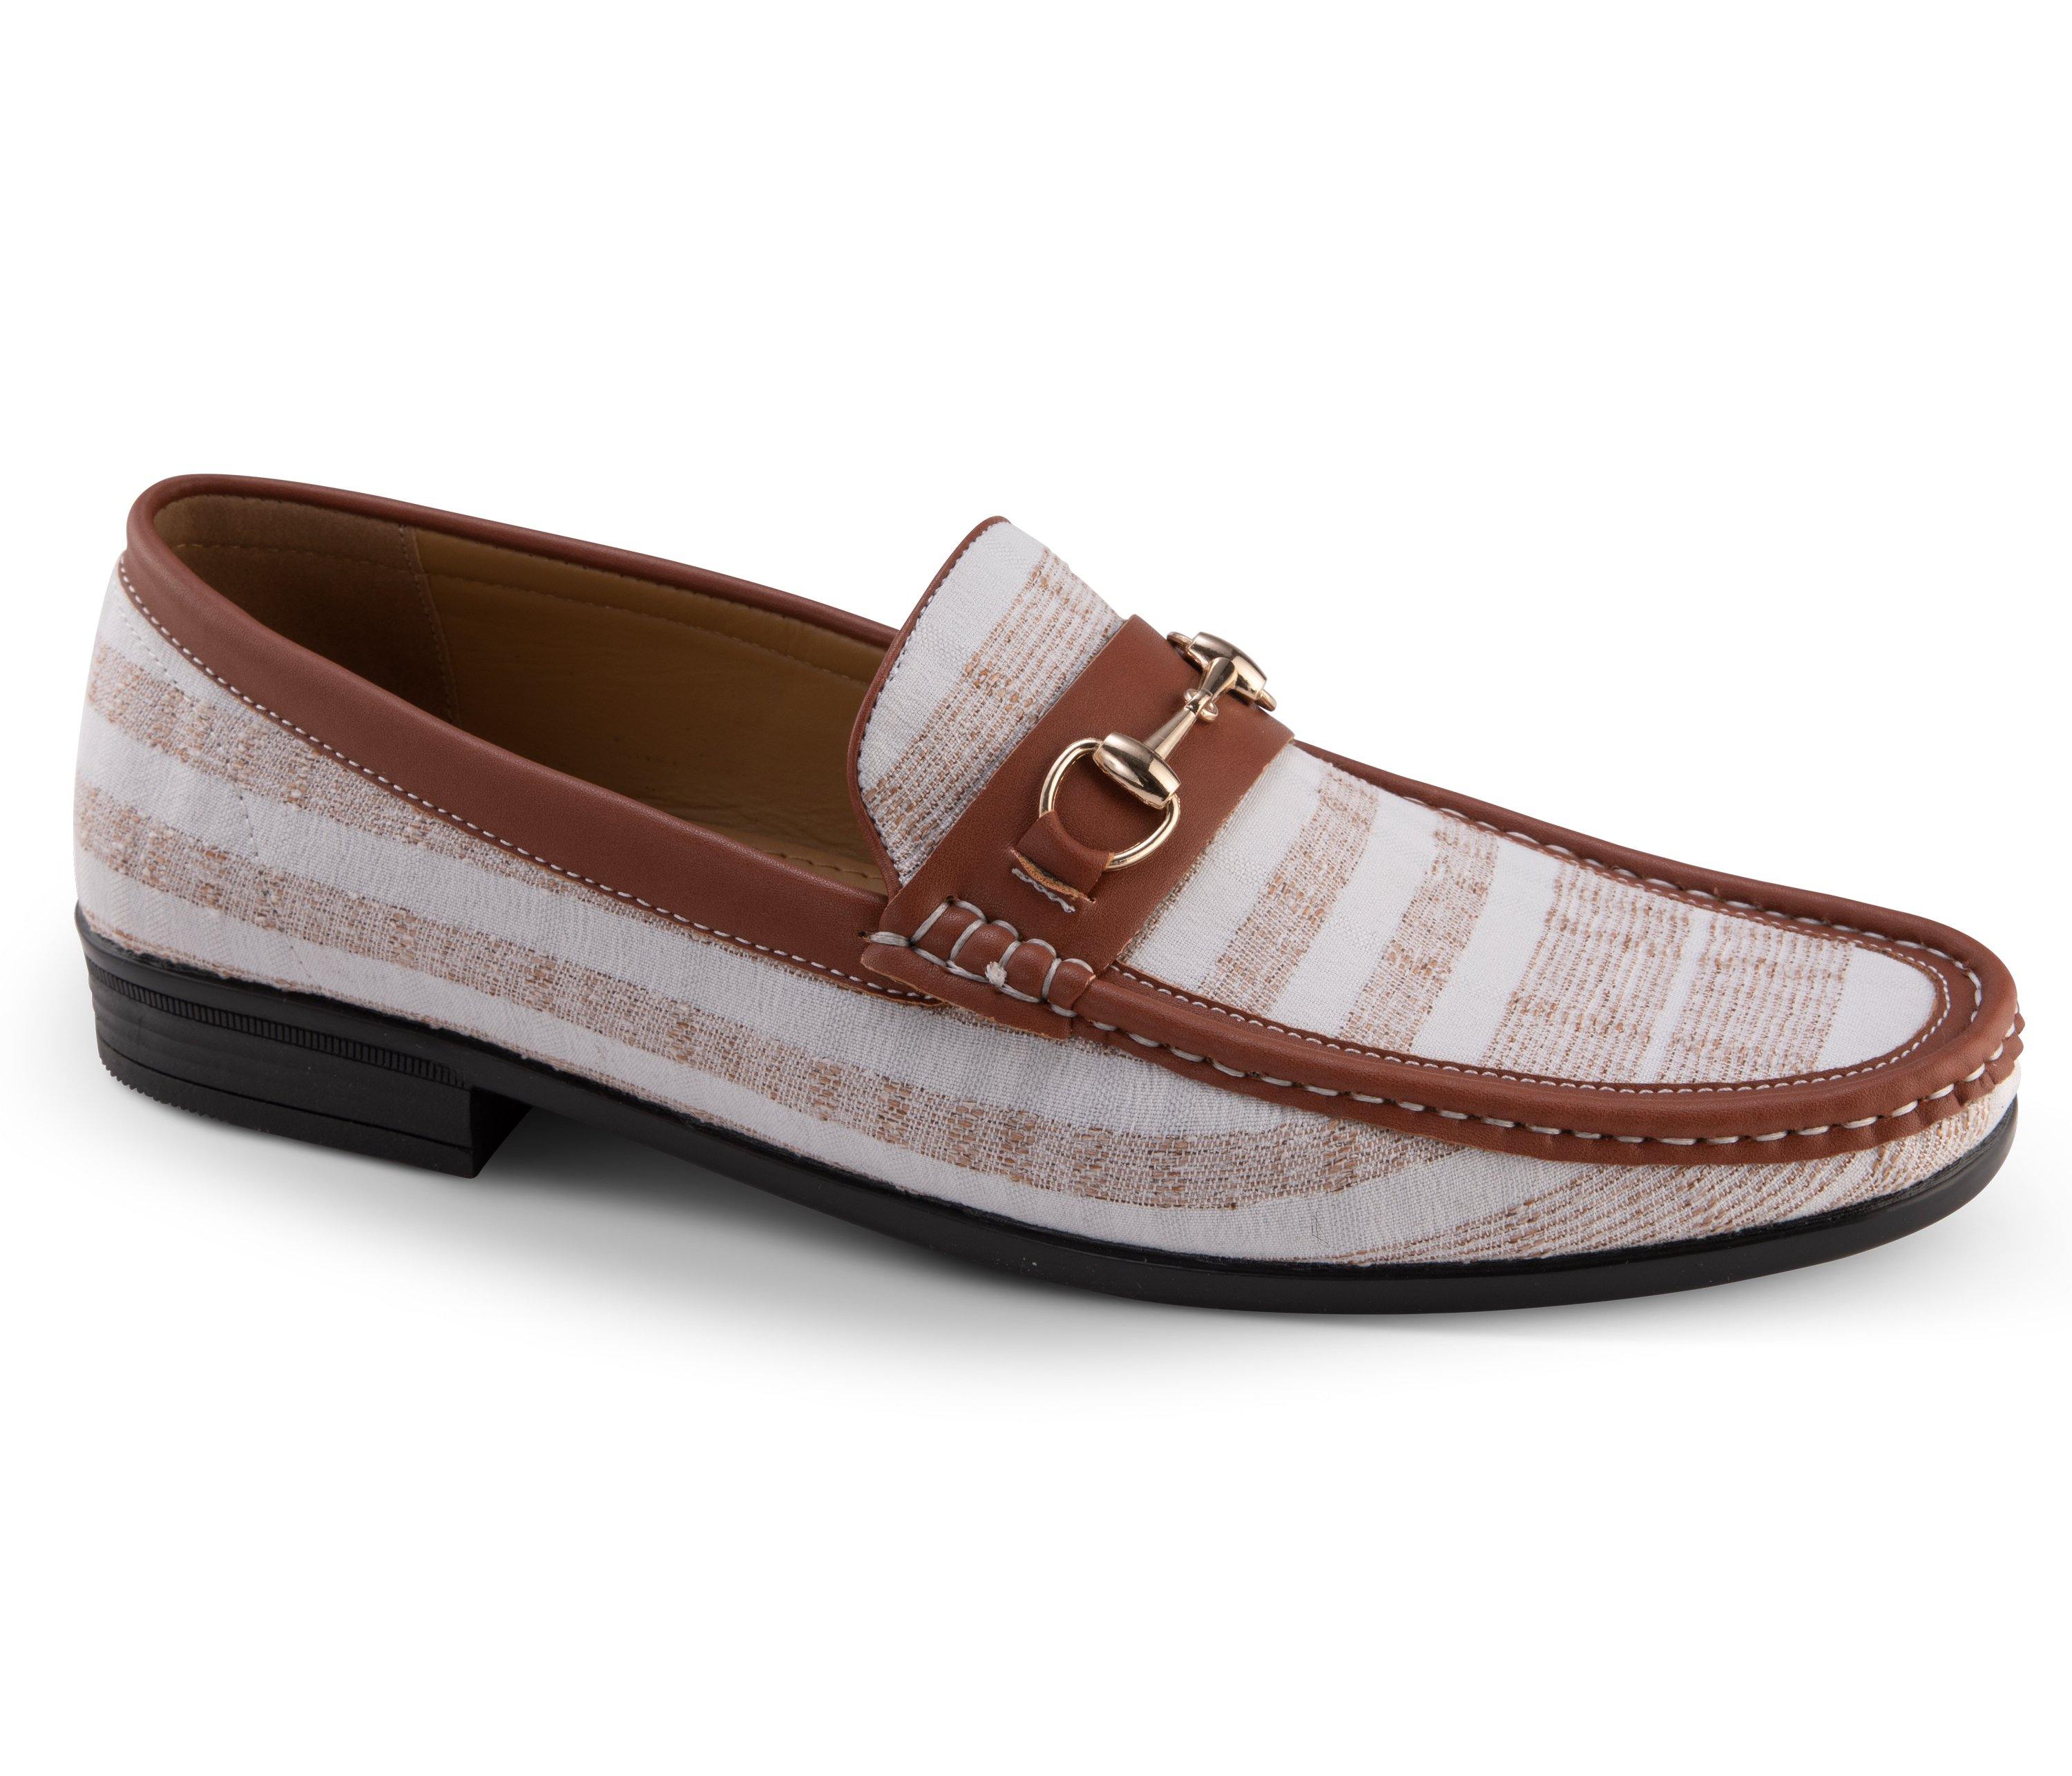 Men's Fashion Loafers Slip-On Shoes in Striped Tan Patterns - S2037 - Suits & More